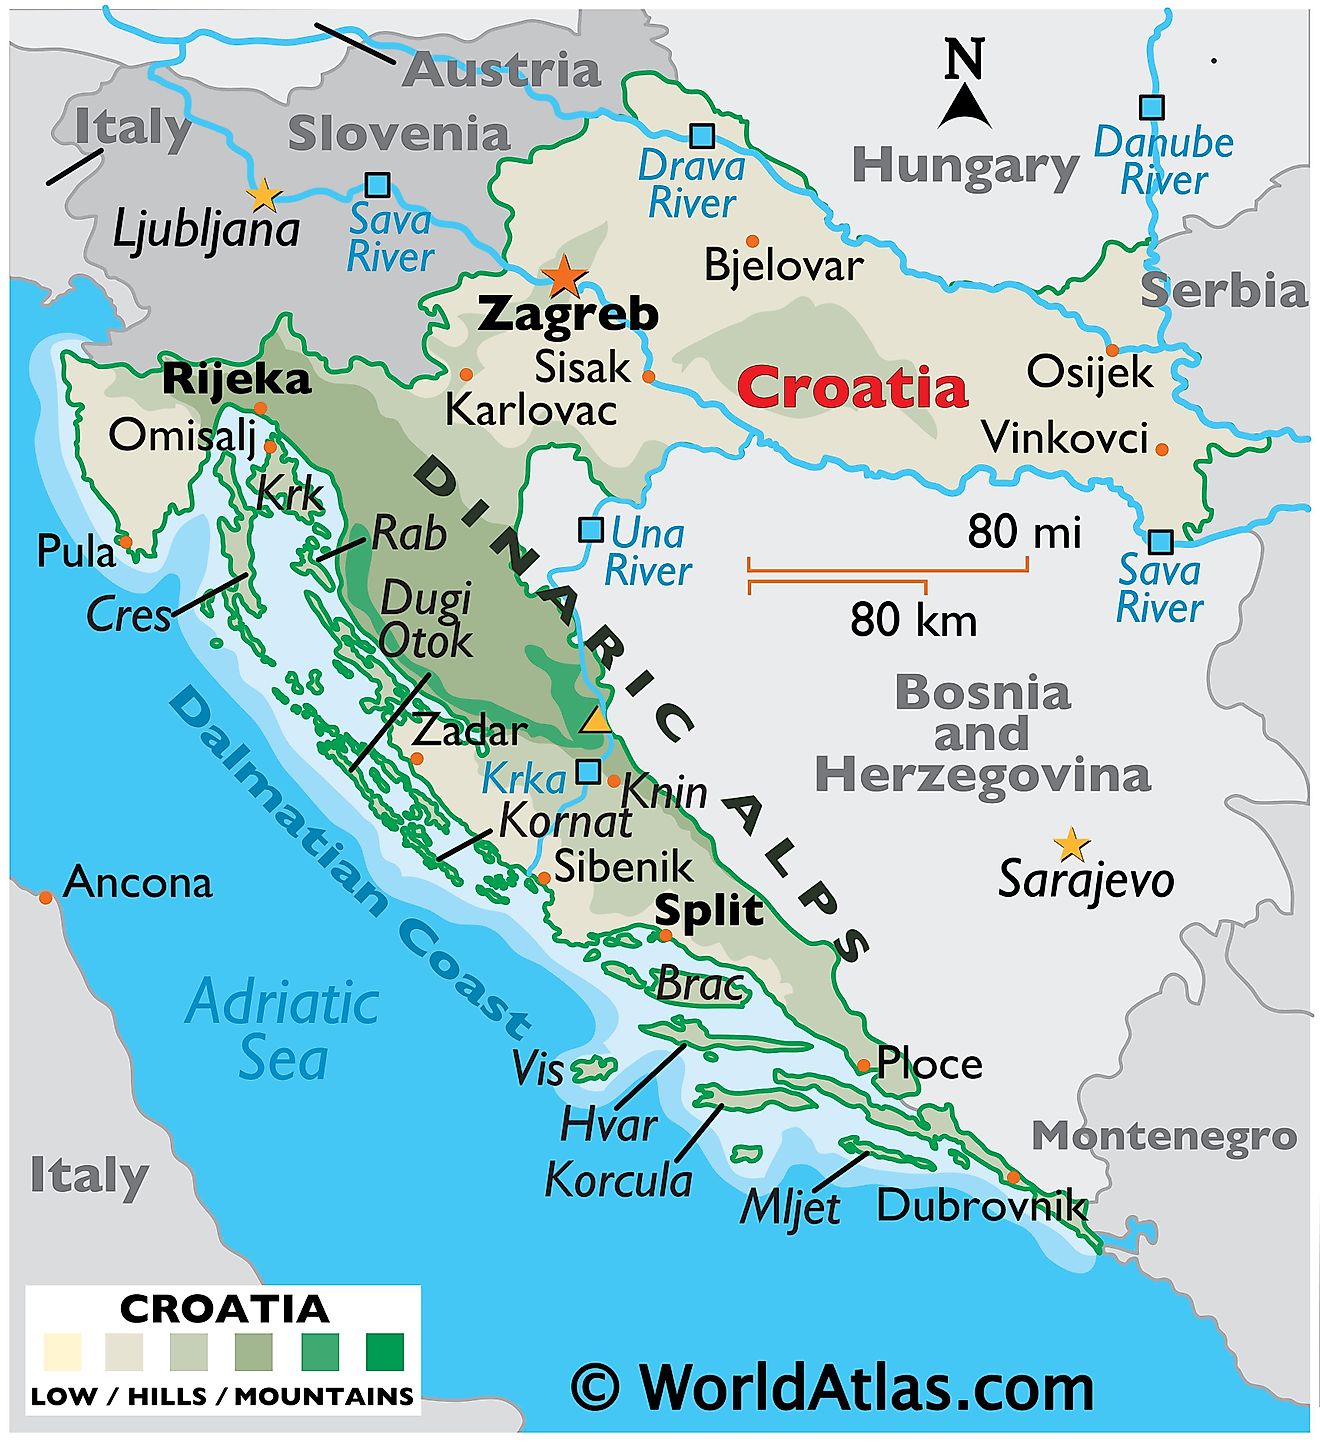 Physical Map of the Croatia showing terrain, mountain ranges, islands, extreme points, major rivers, important cities, international boundaries, etc.